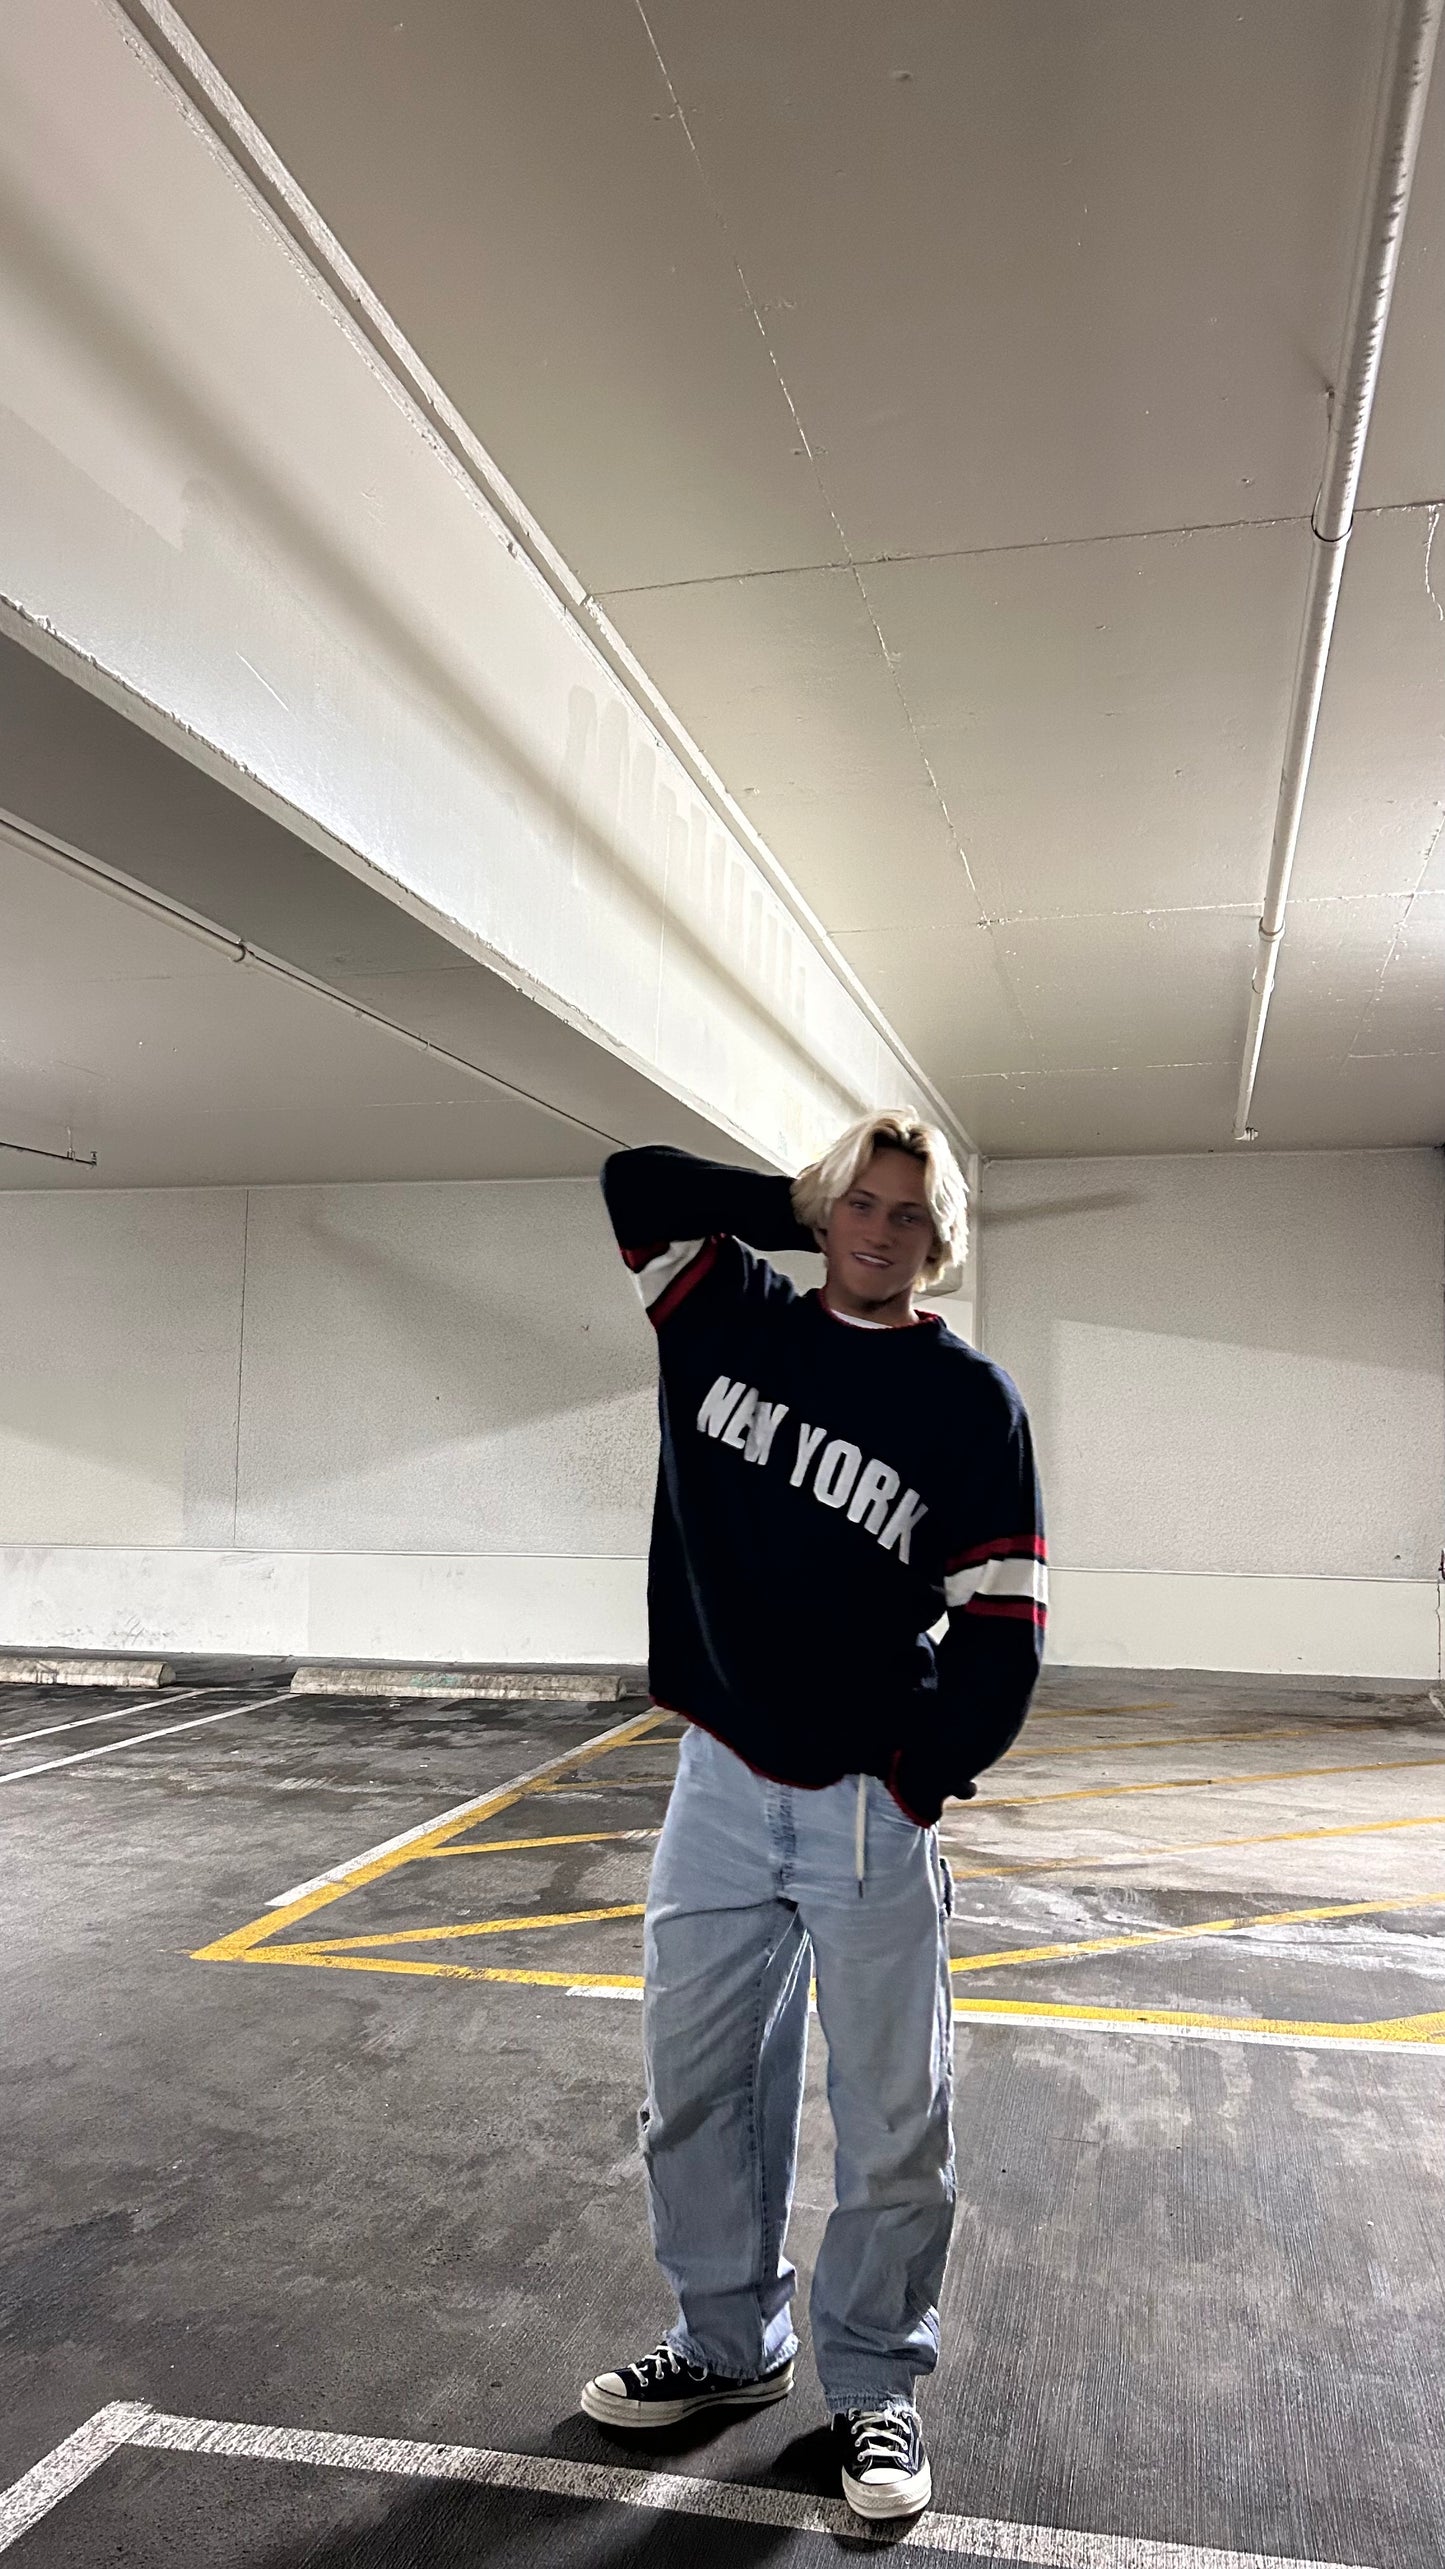 Vintage 90’s New York knit sweater